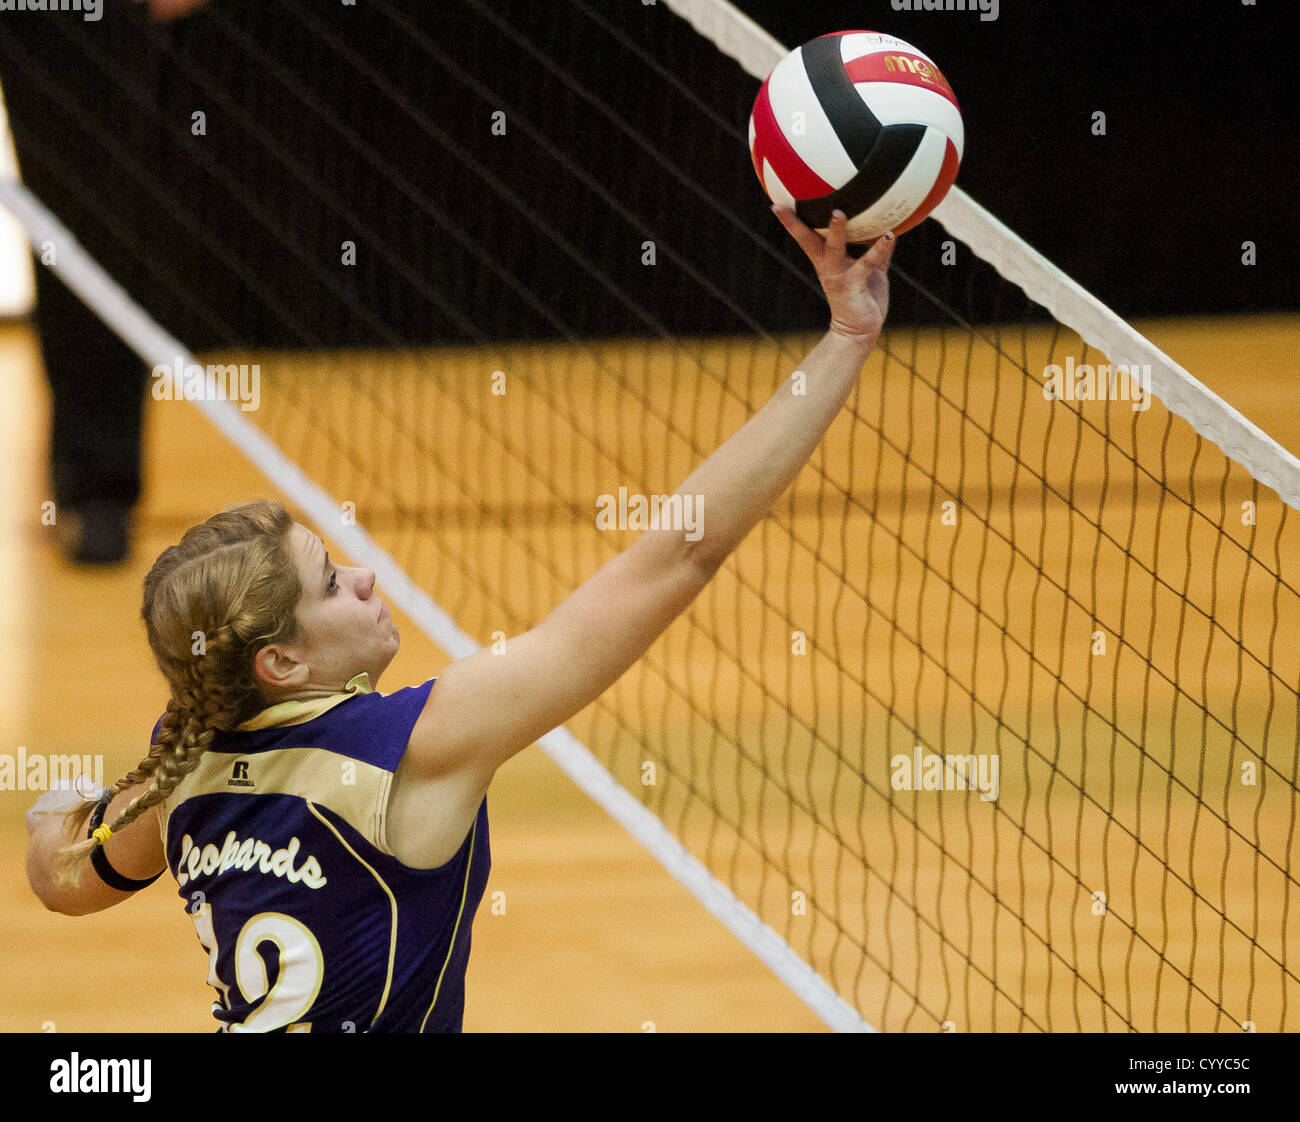 Nov. 12, 2012 - College Park, Maryland, U.S. - Smithsburg's Haley Caudell hits the ball during the Sparrows Point High School versus Smithsburg High School match in the Semifinals of the Maryland State Volleyball 1A Championship at Ritchie Coliseum in College Park, Maryland on November 12, 2012. Smithsburg defeated Sparrows Point in straight sets 25-10, 25-12, 25-10 to advance to the State Finals. (Credit Image: © Scott Serio/Eclipse/ZUMAPRESS.com) Stock Photo